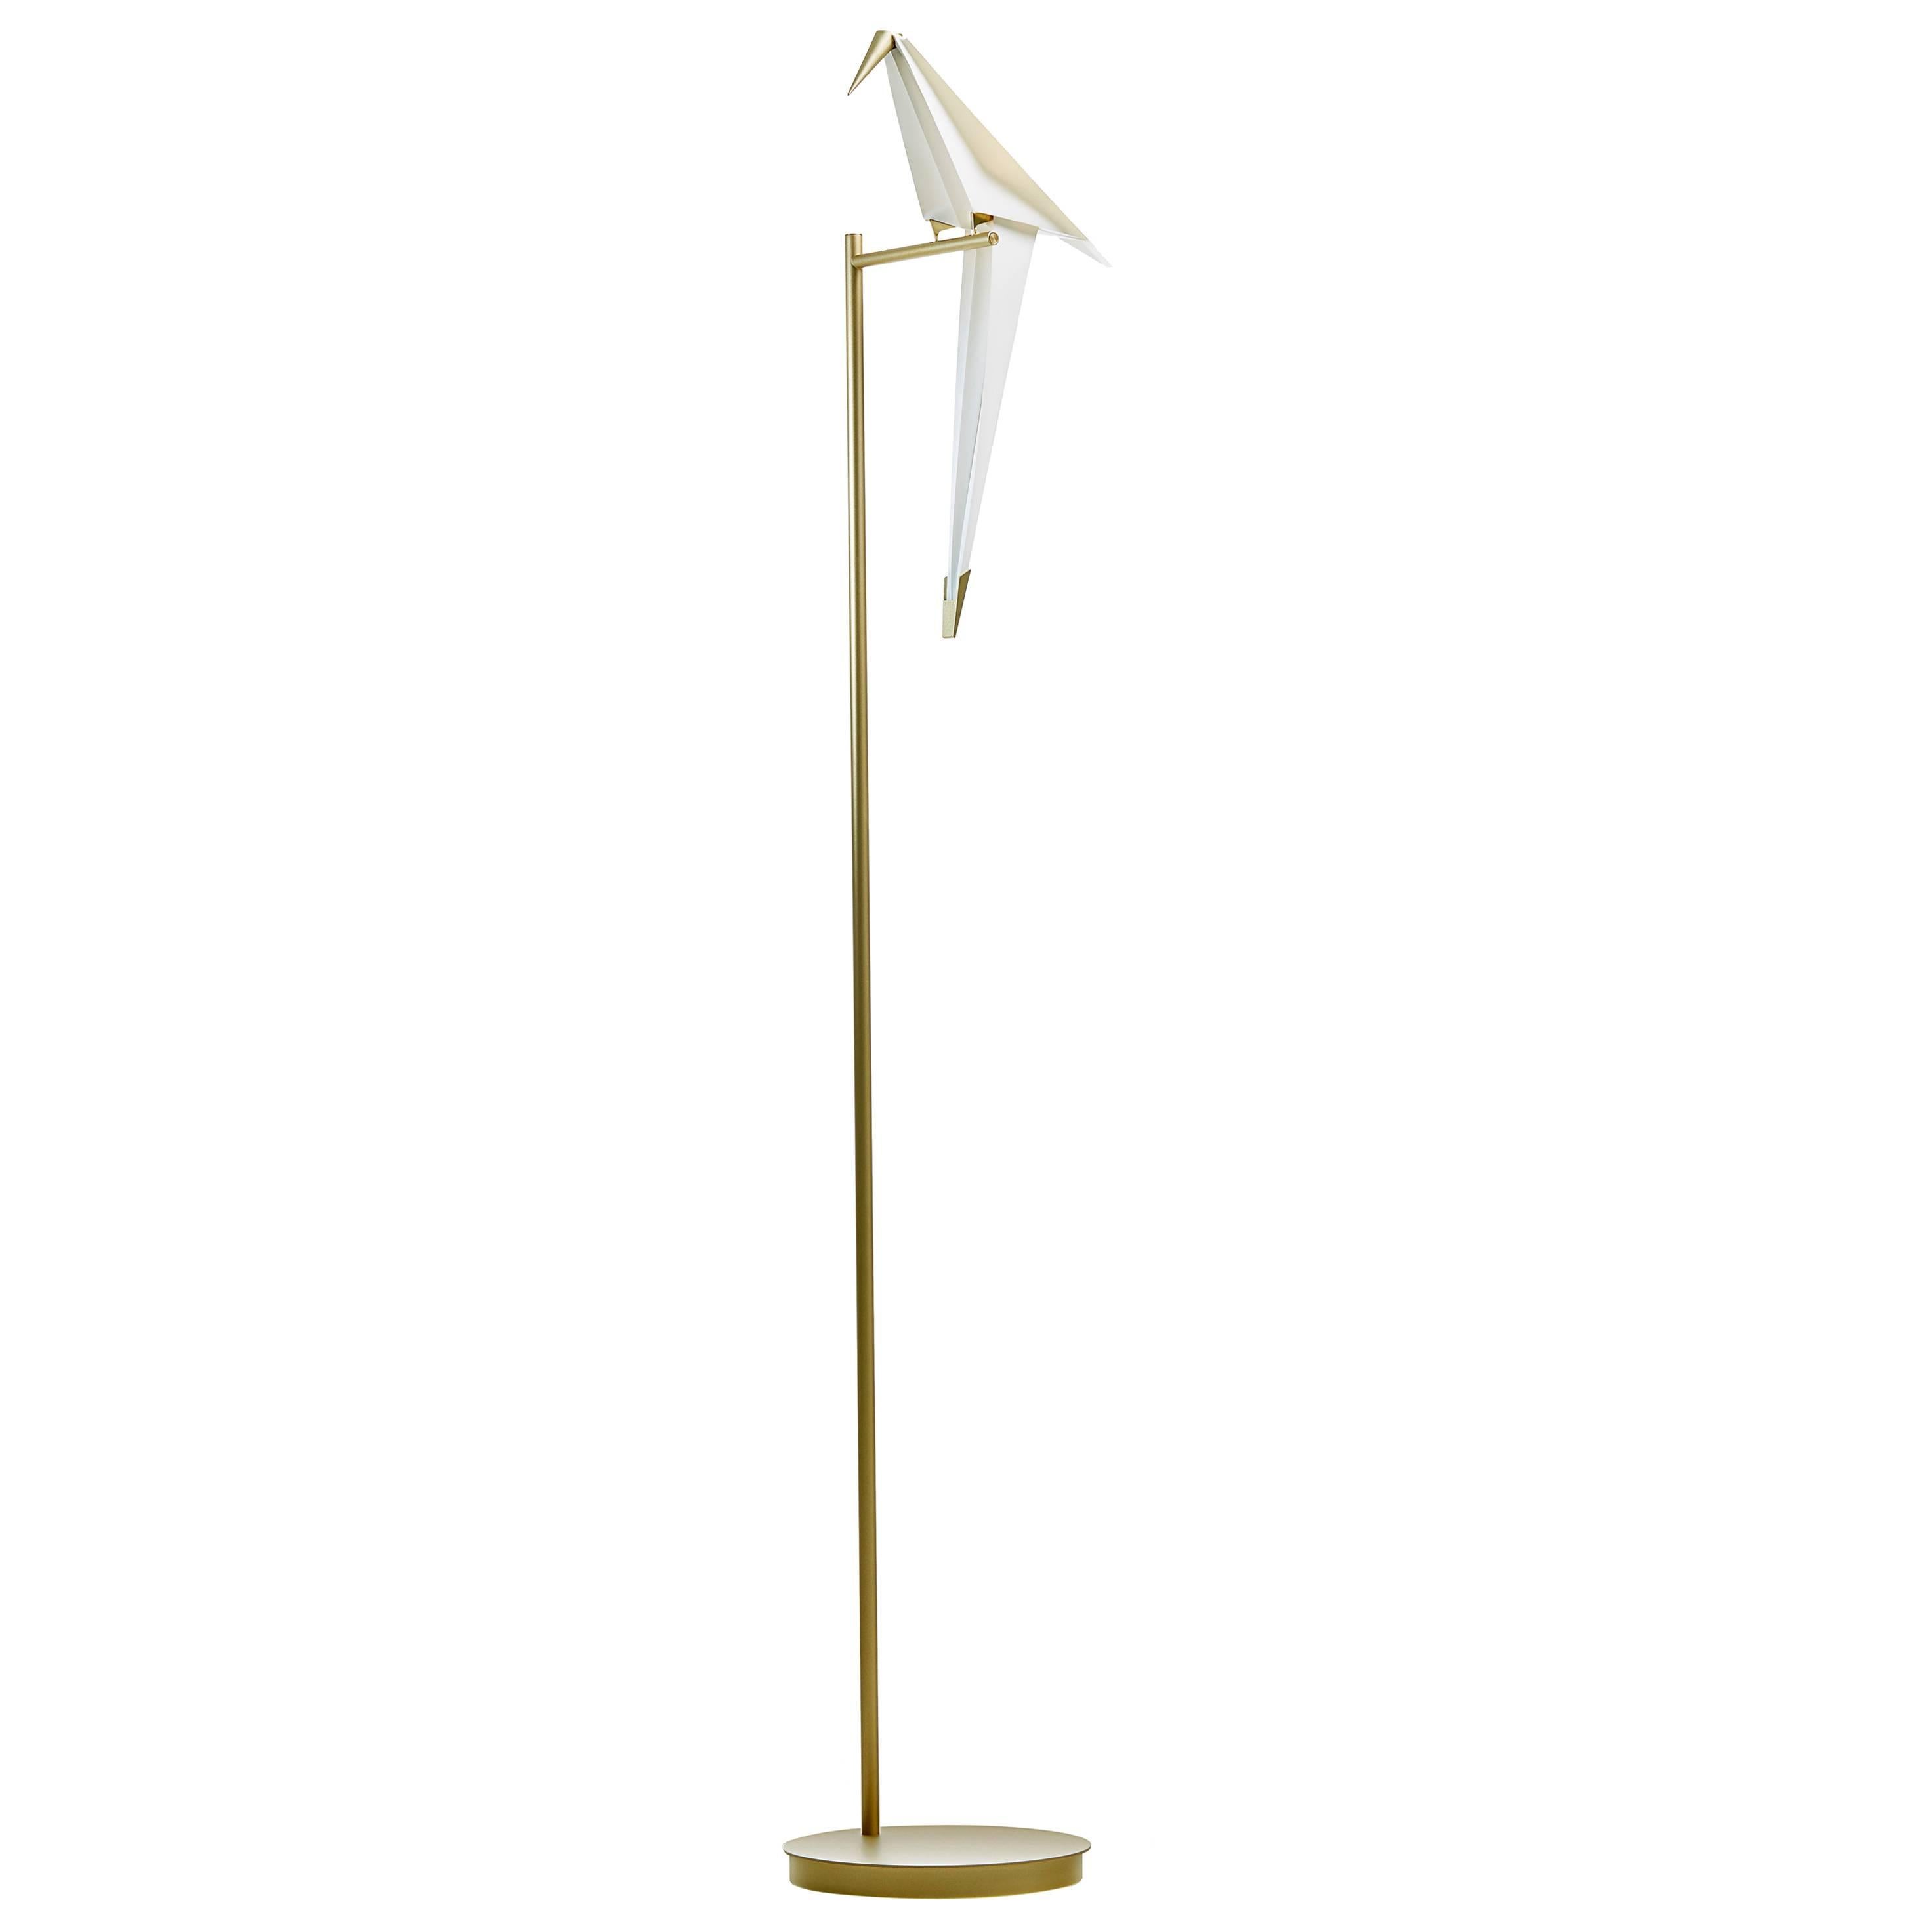 Moooi Perch LED Floor Lamp in Brass with White Bird For Sale